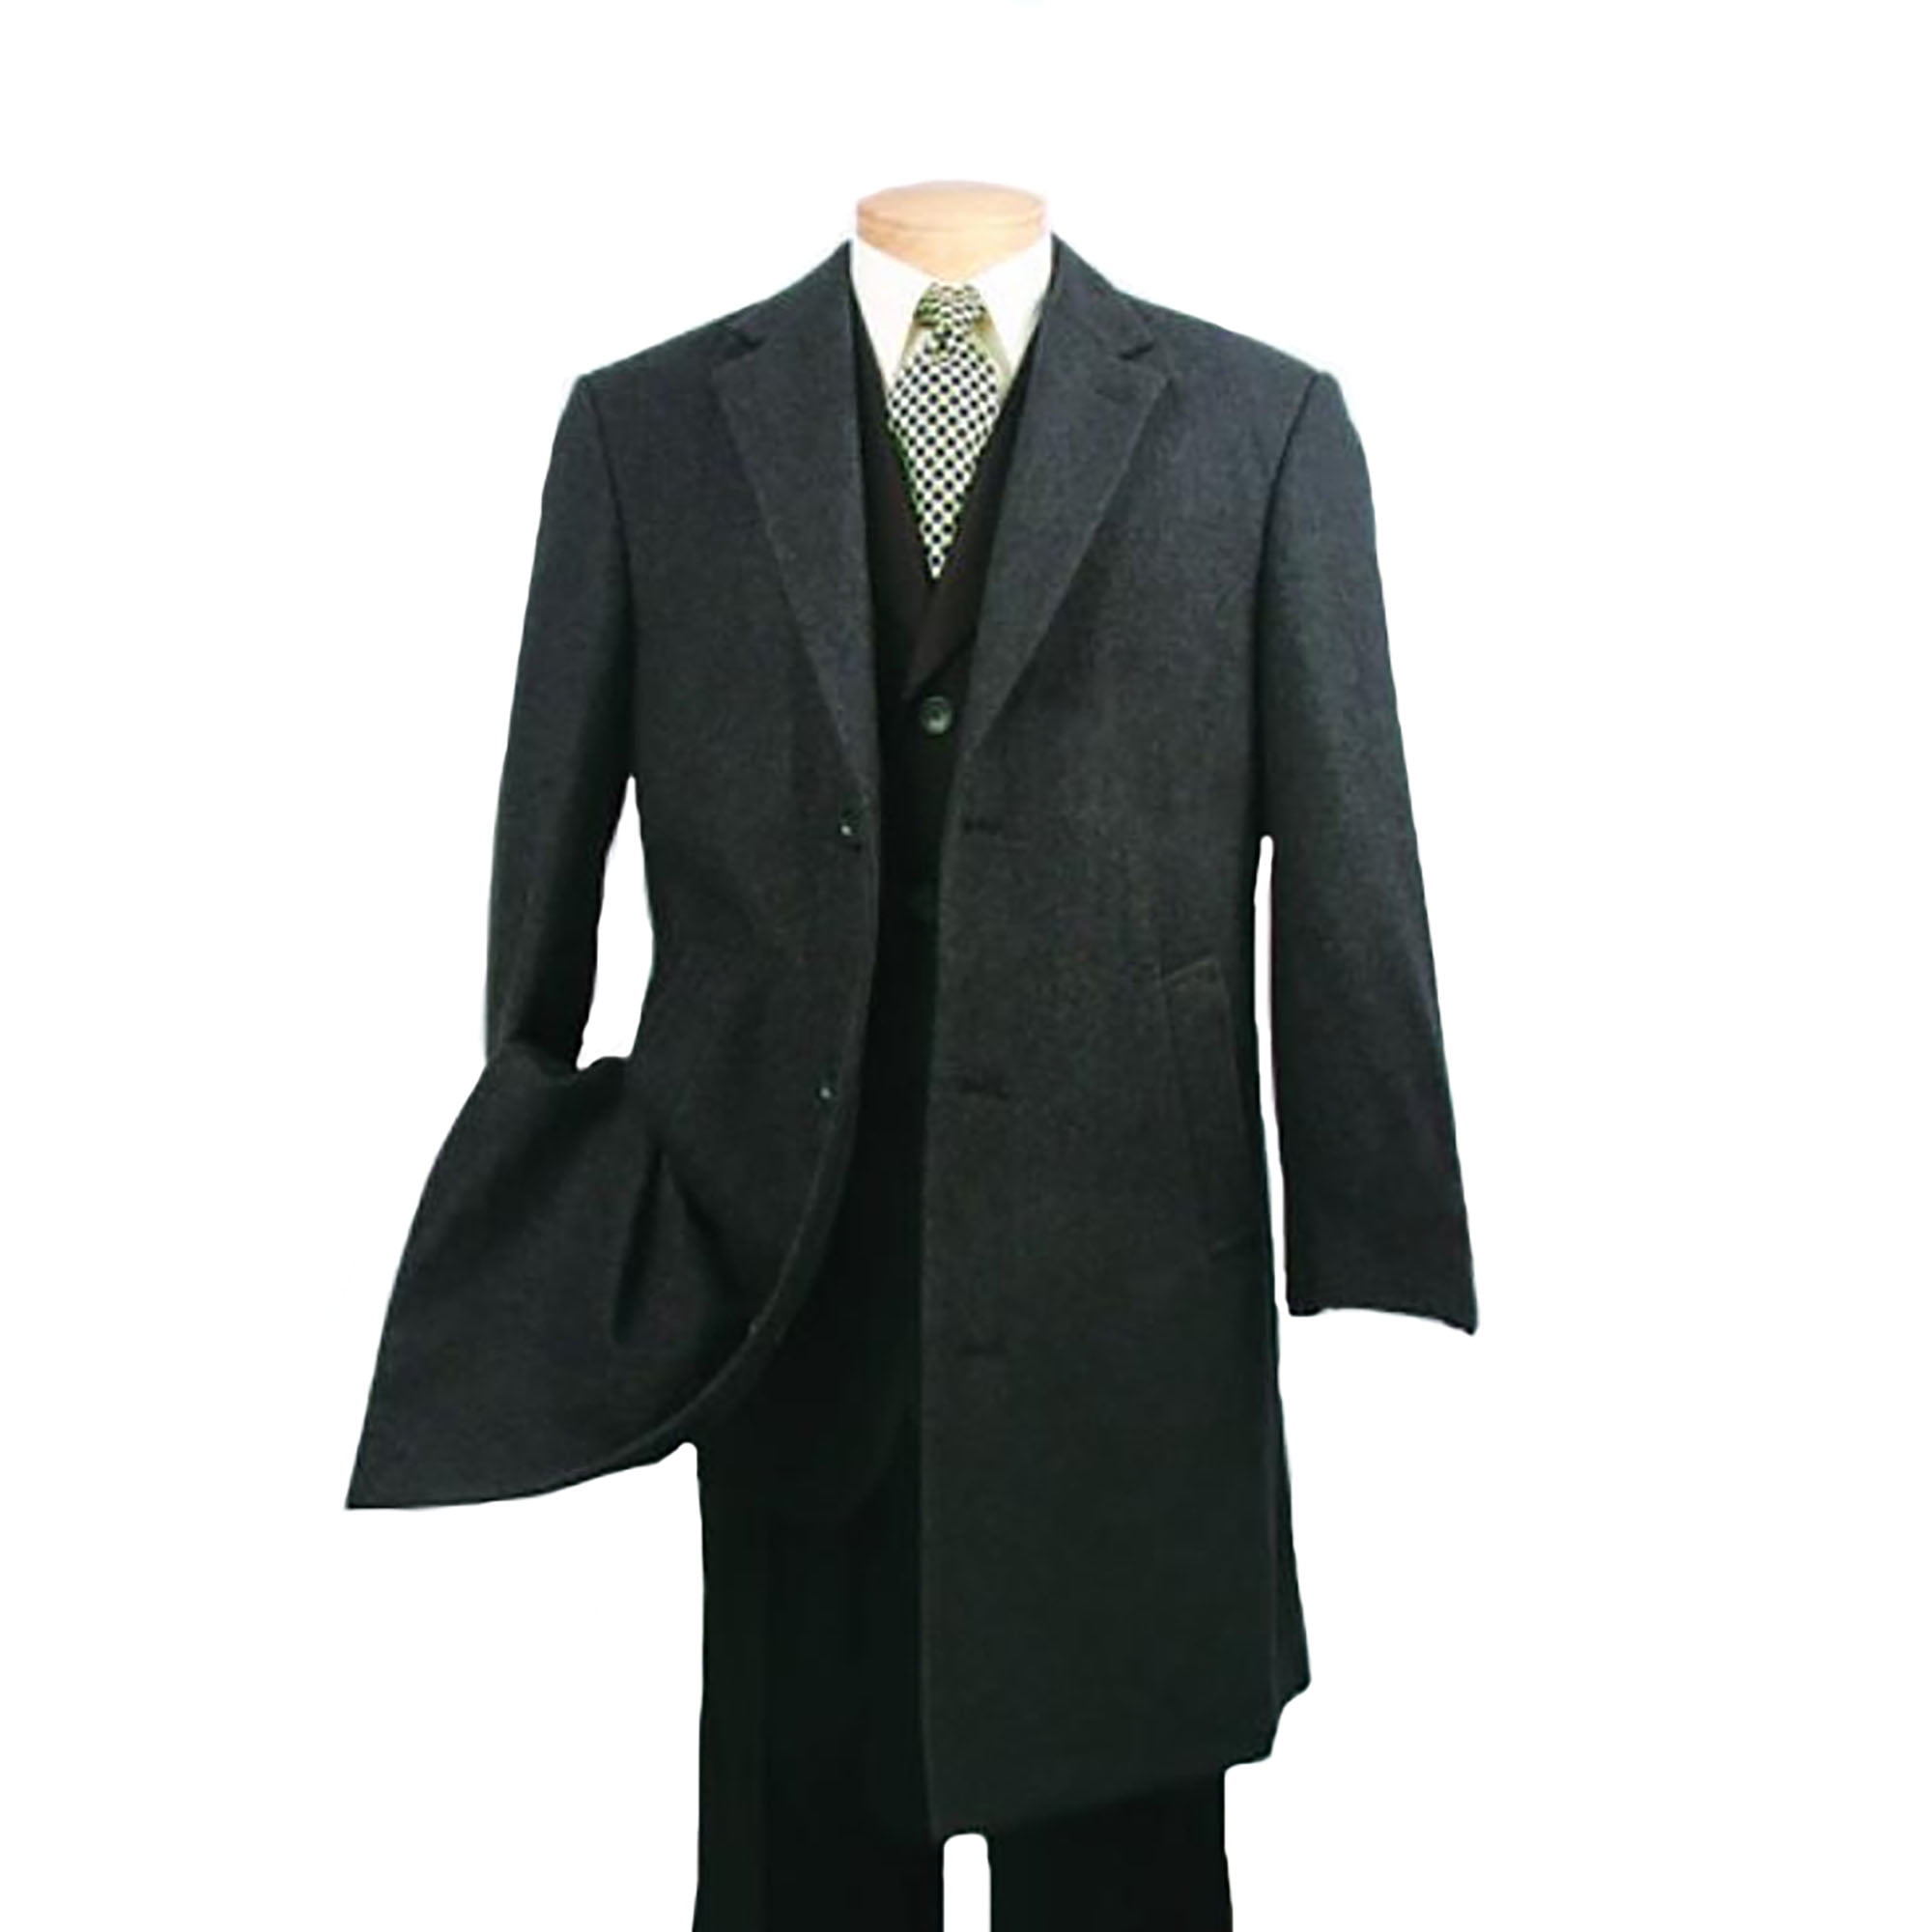 Suit USA - Mens Charcoal Single Breasted Wool Cashmere Overcoat Topcoat ...